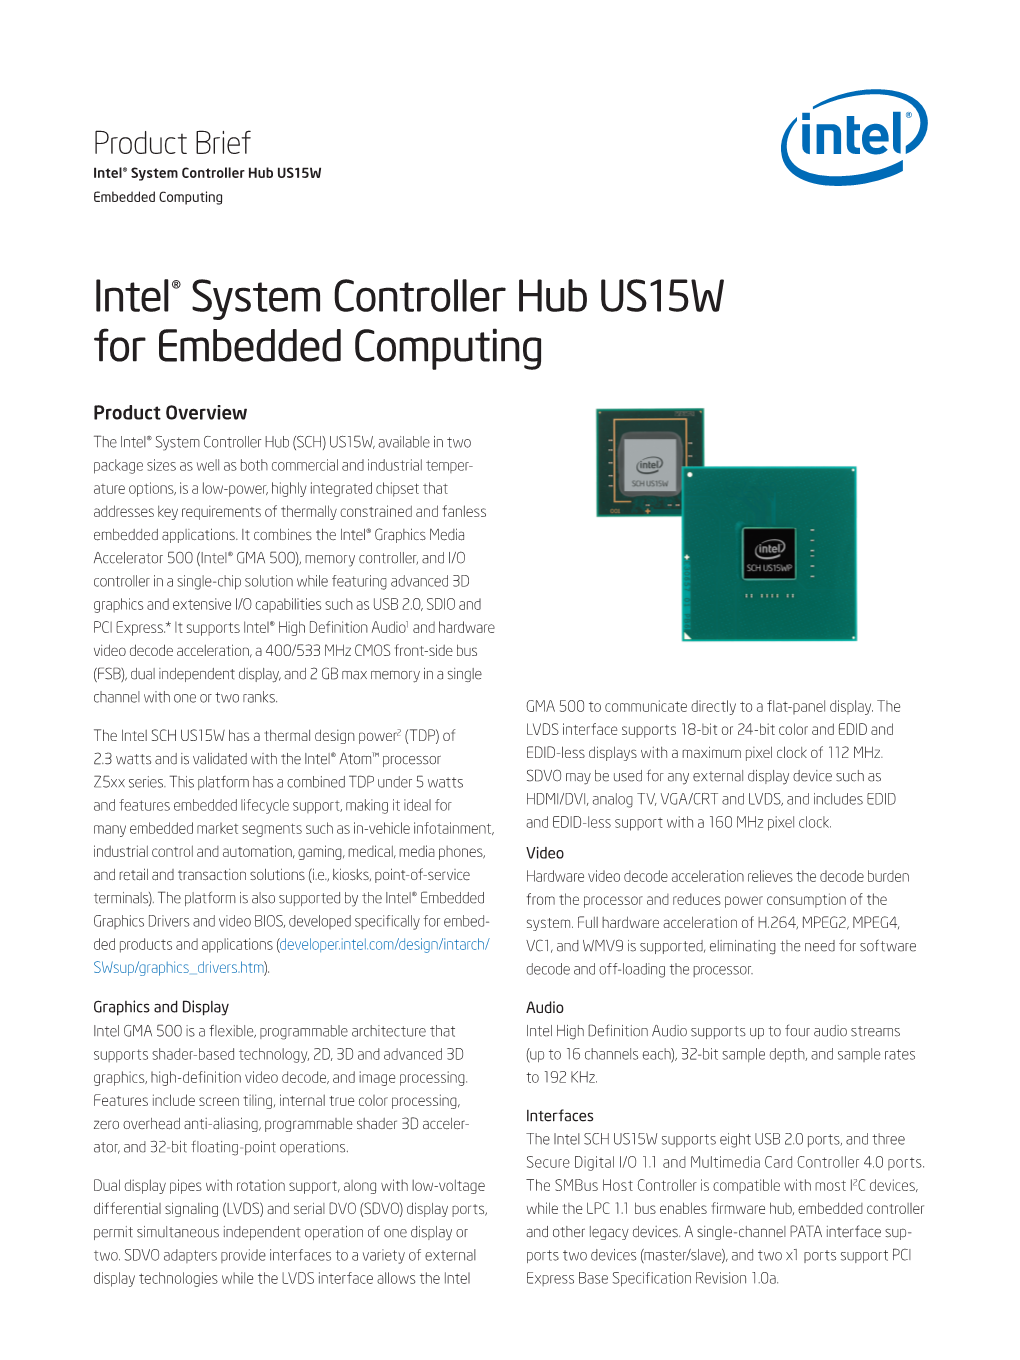 Intel® System Controller Hub US15W for Embedded Computing